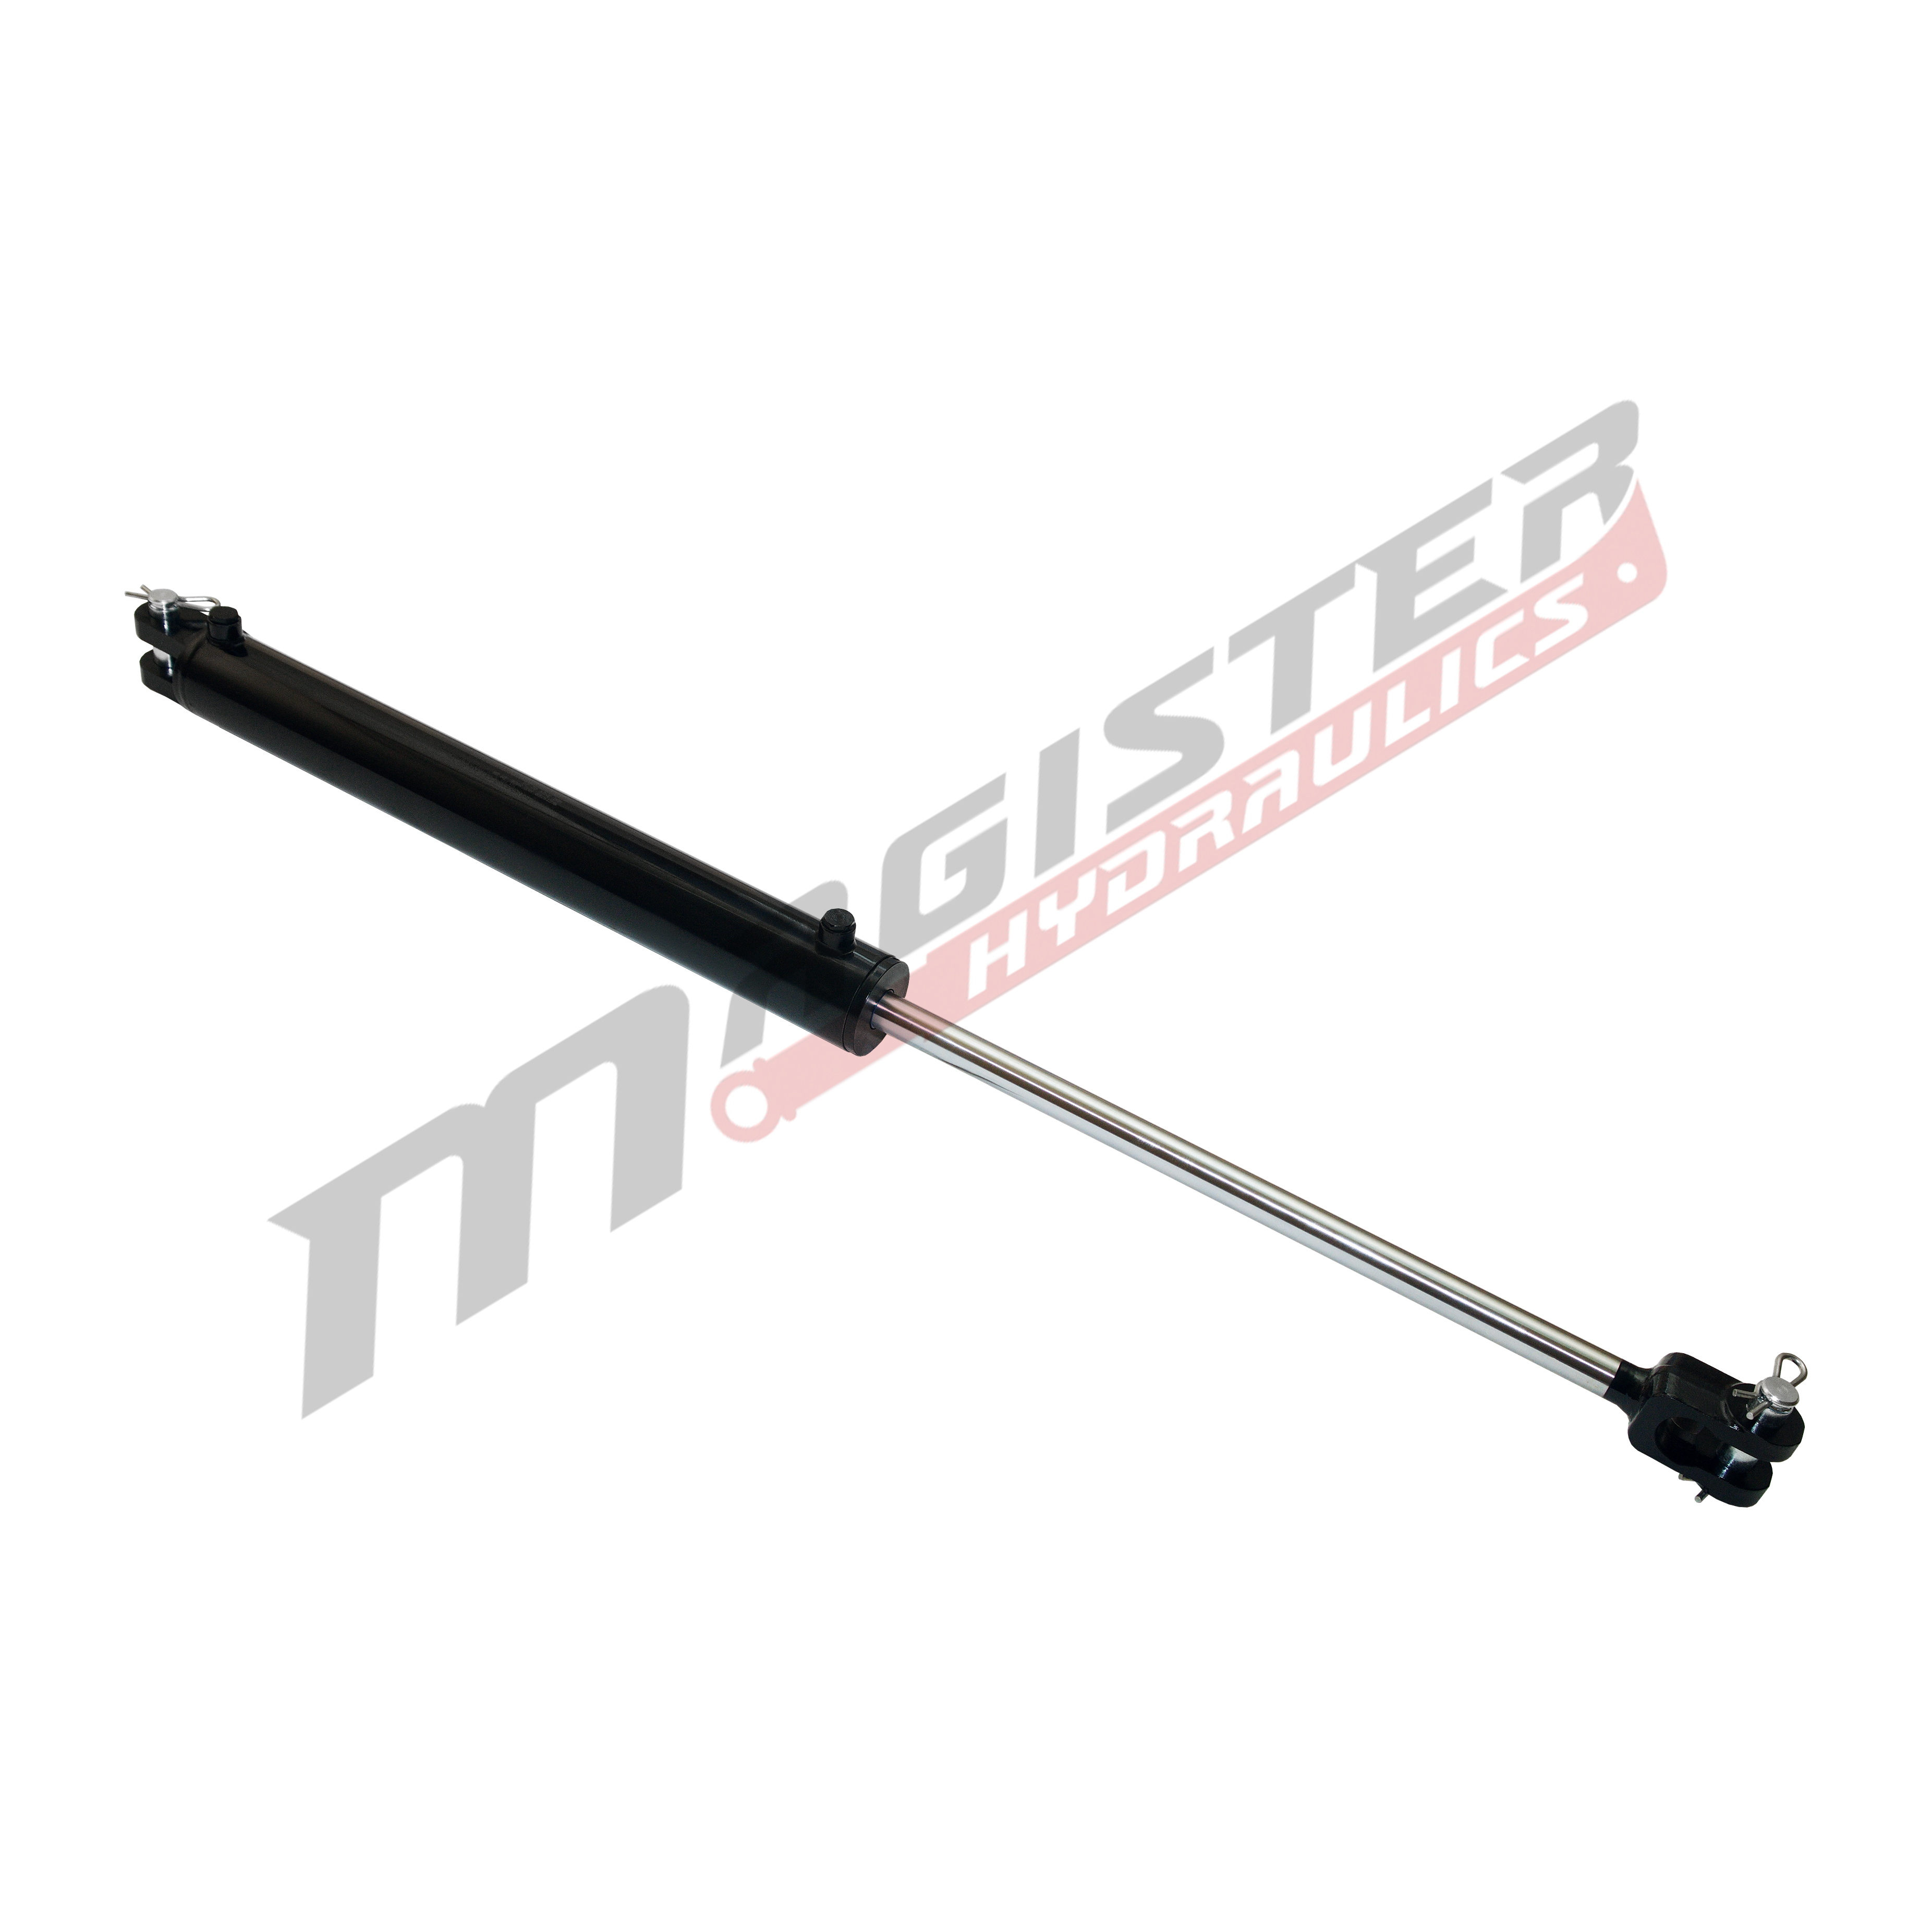 3.5 bore x 12 stroke hydraulic cylinder, ag clevis double acting cylinder | Magister Hydraulics